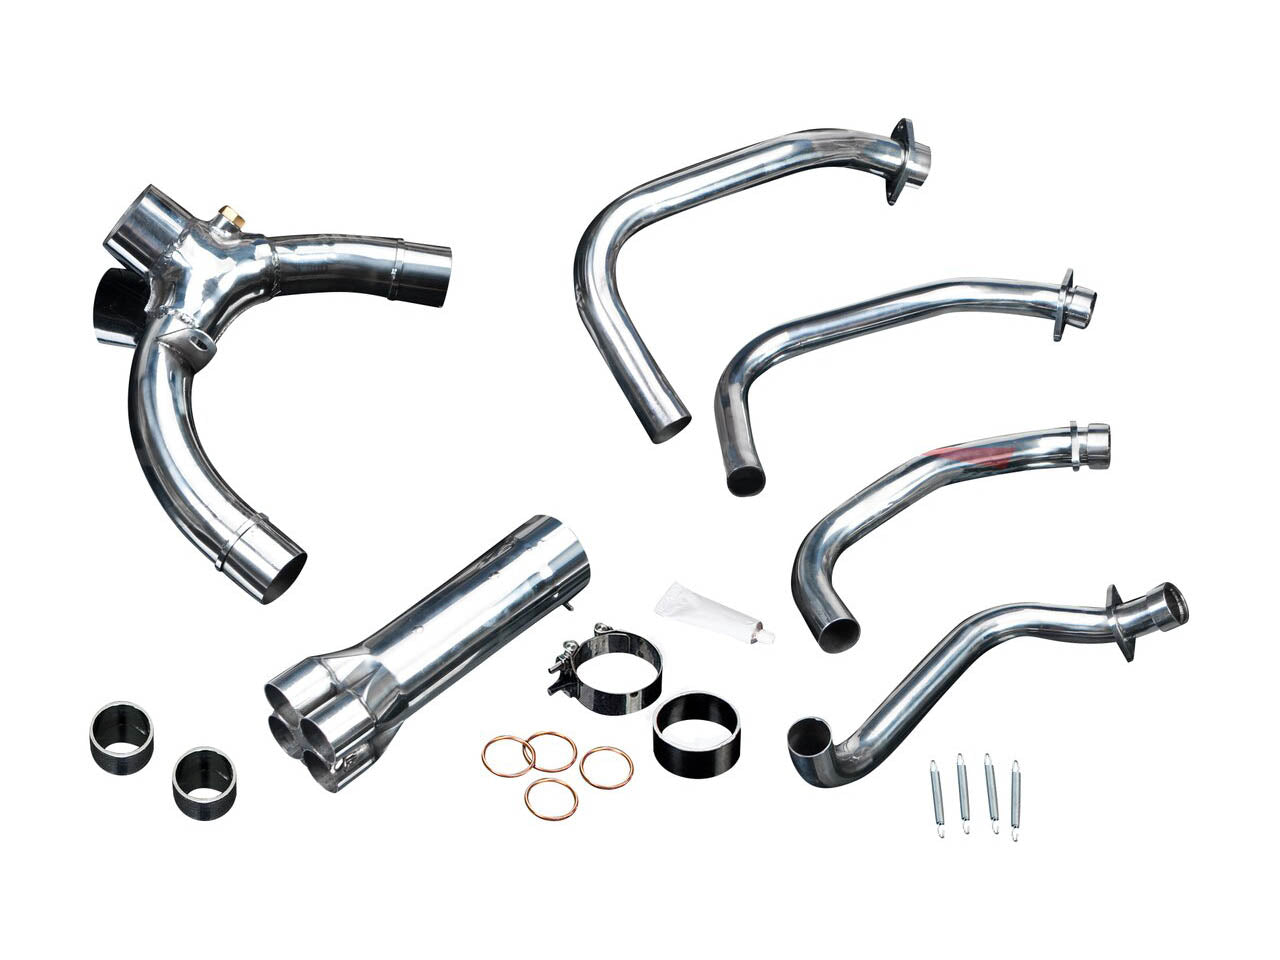 DELKEVIC Honda CBR1100XX Blackbird Full Exhaust System with Stubby 17" Tri-Oval Silencers